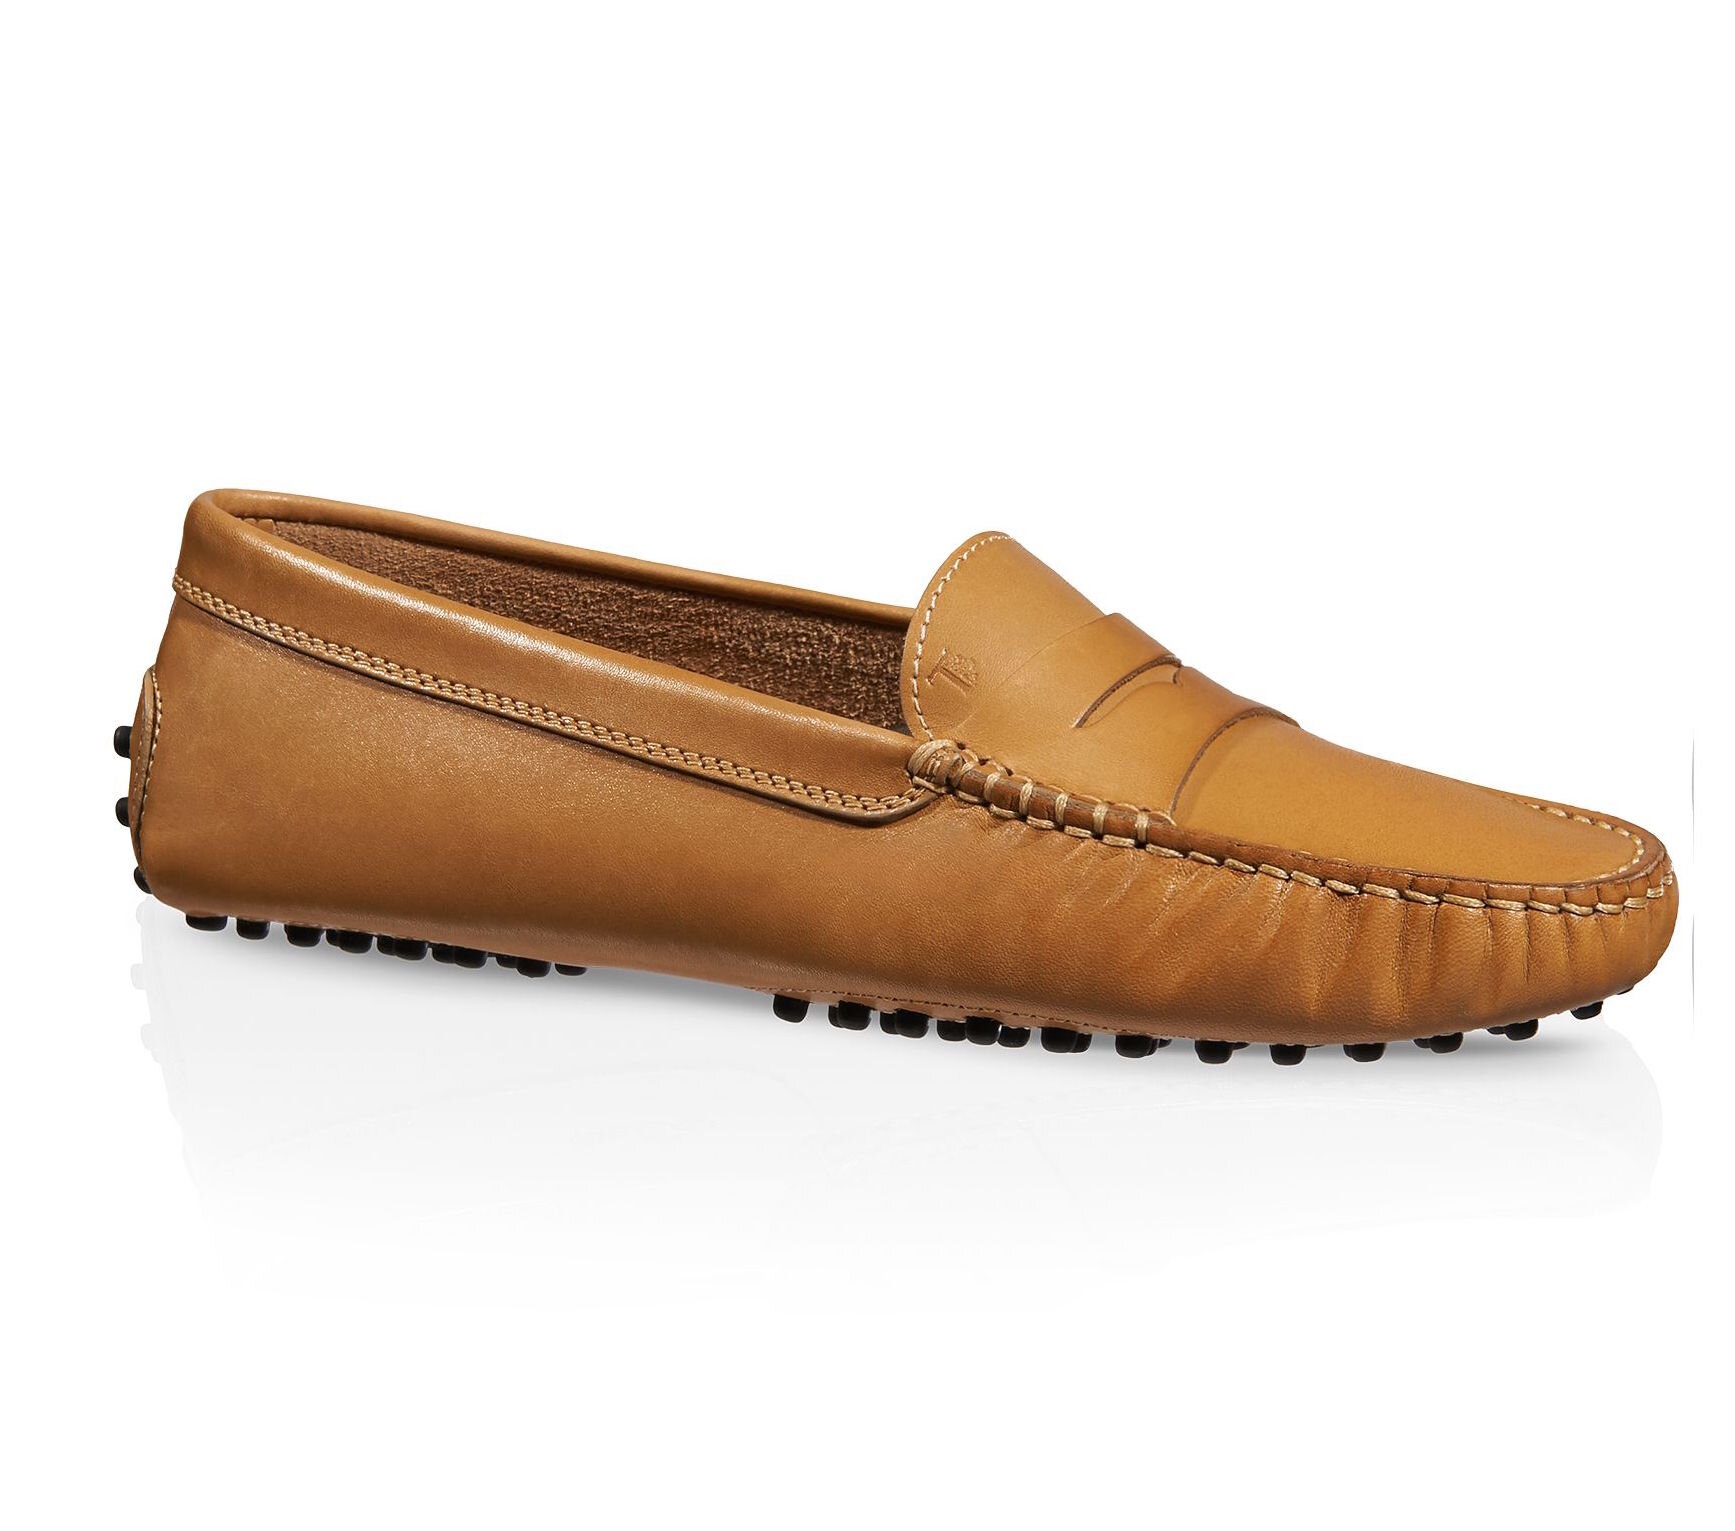 Tod's Gommino Driving Shoes in Tan Leather.jpg